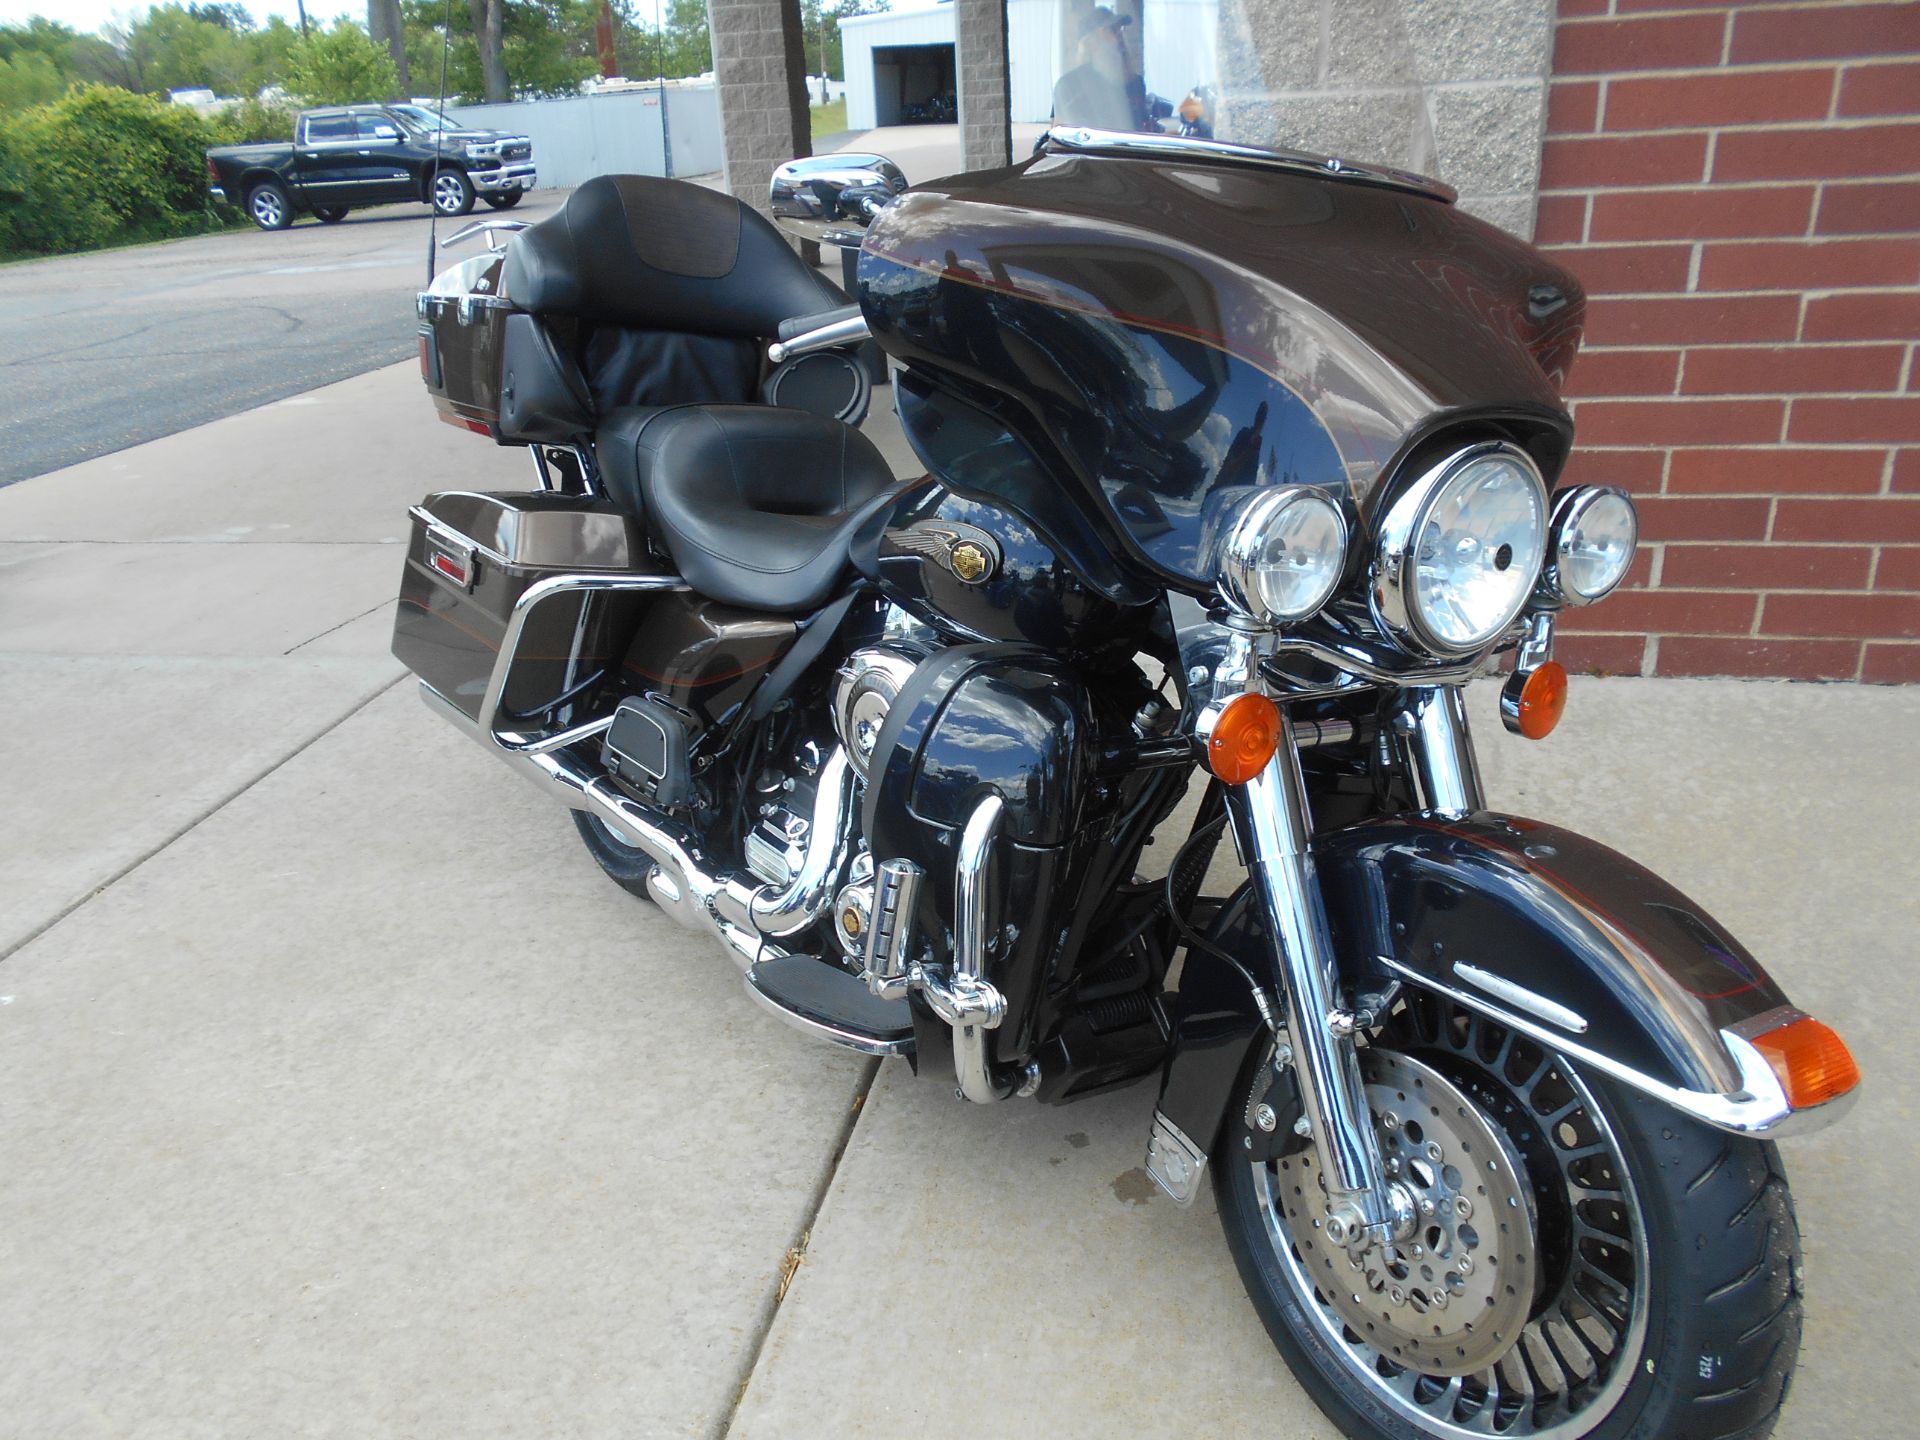 2013 Harley-Davidson Electra Glide® Ultra Limited 110th Anniversary Edition in Mauston, Wisconsin - Photo 4